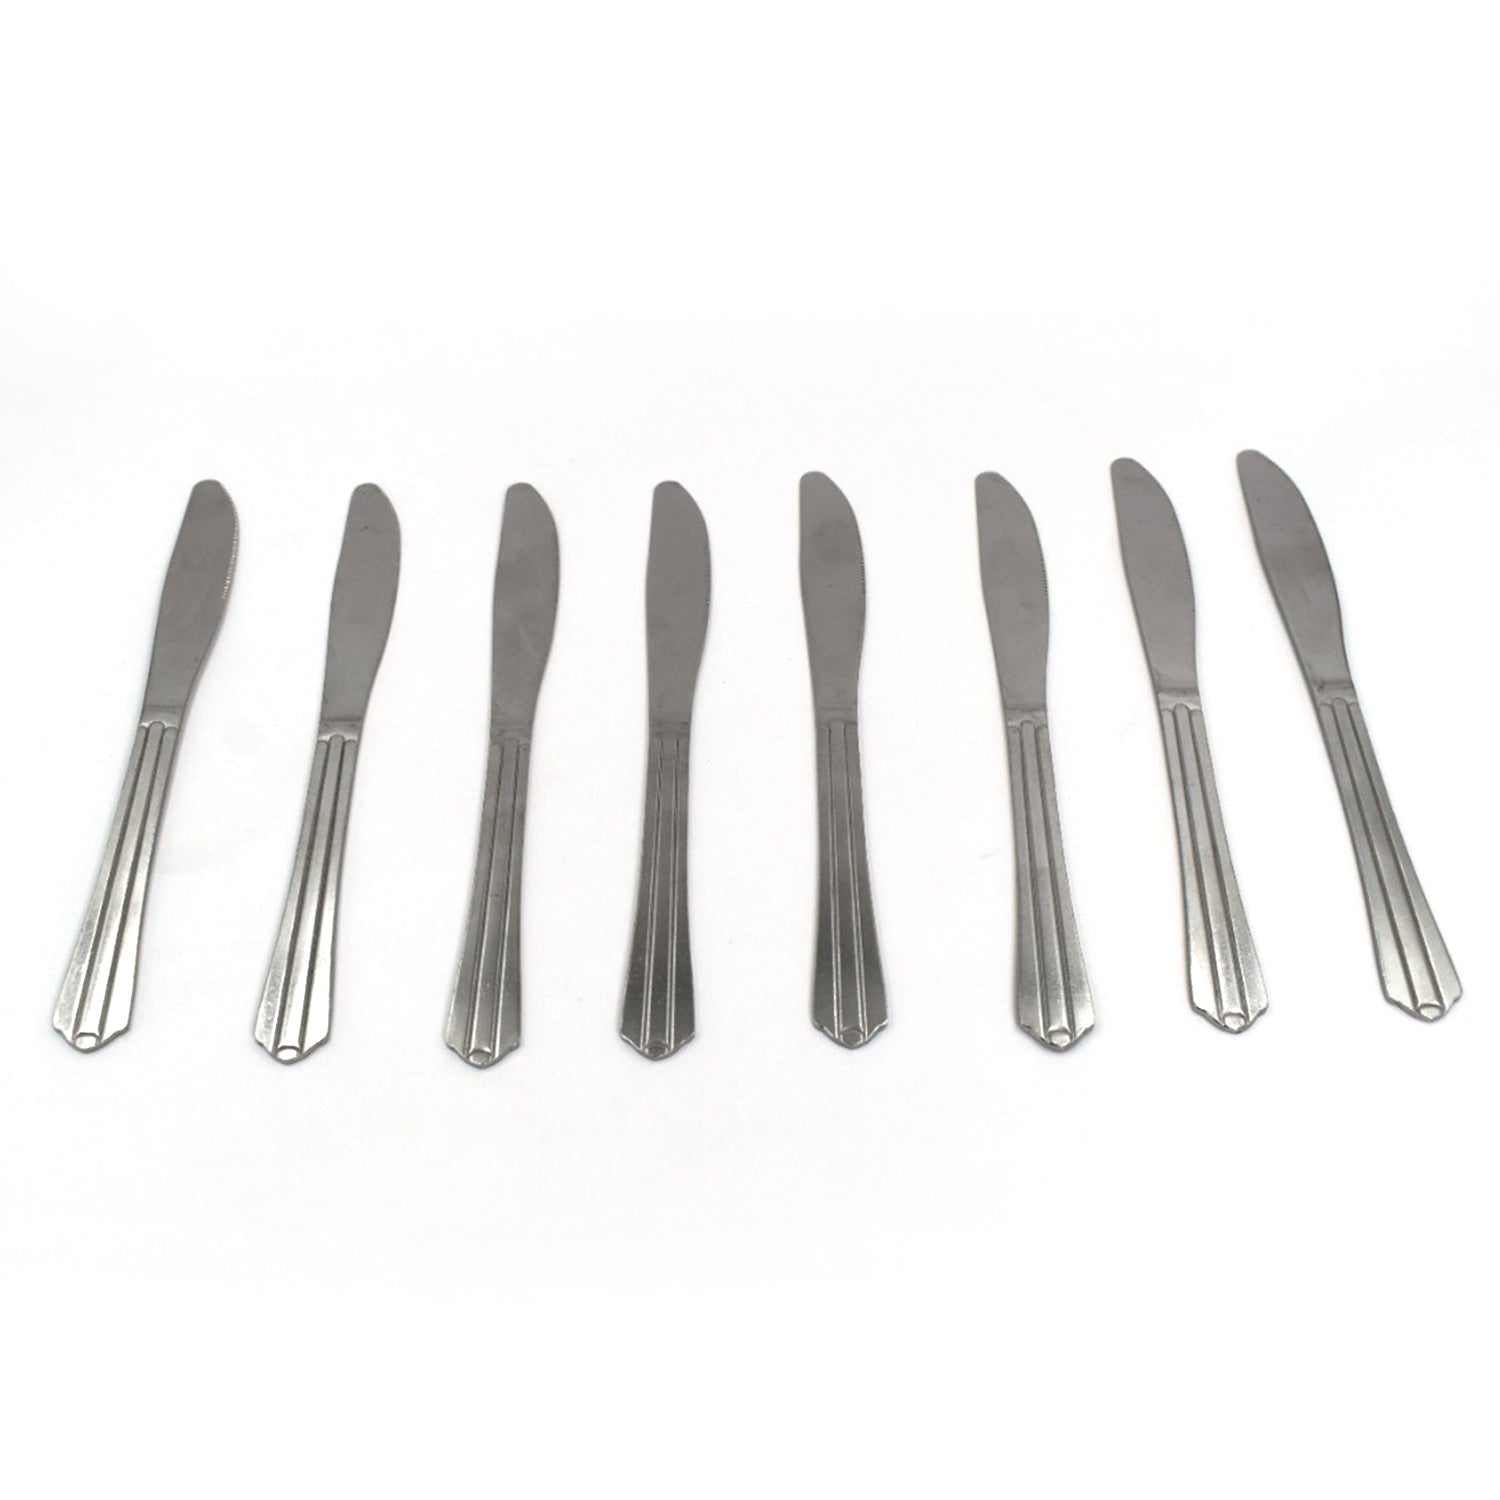 2777 8 Pieces Dinner Knife Cutlery Set Used for Salad sandwich and Portable to be Taken for Outing or Picnic DeoDap